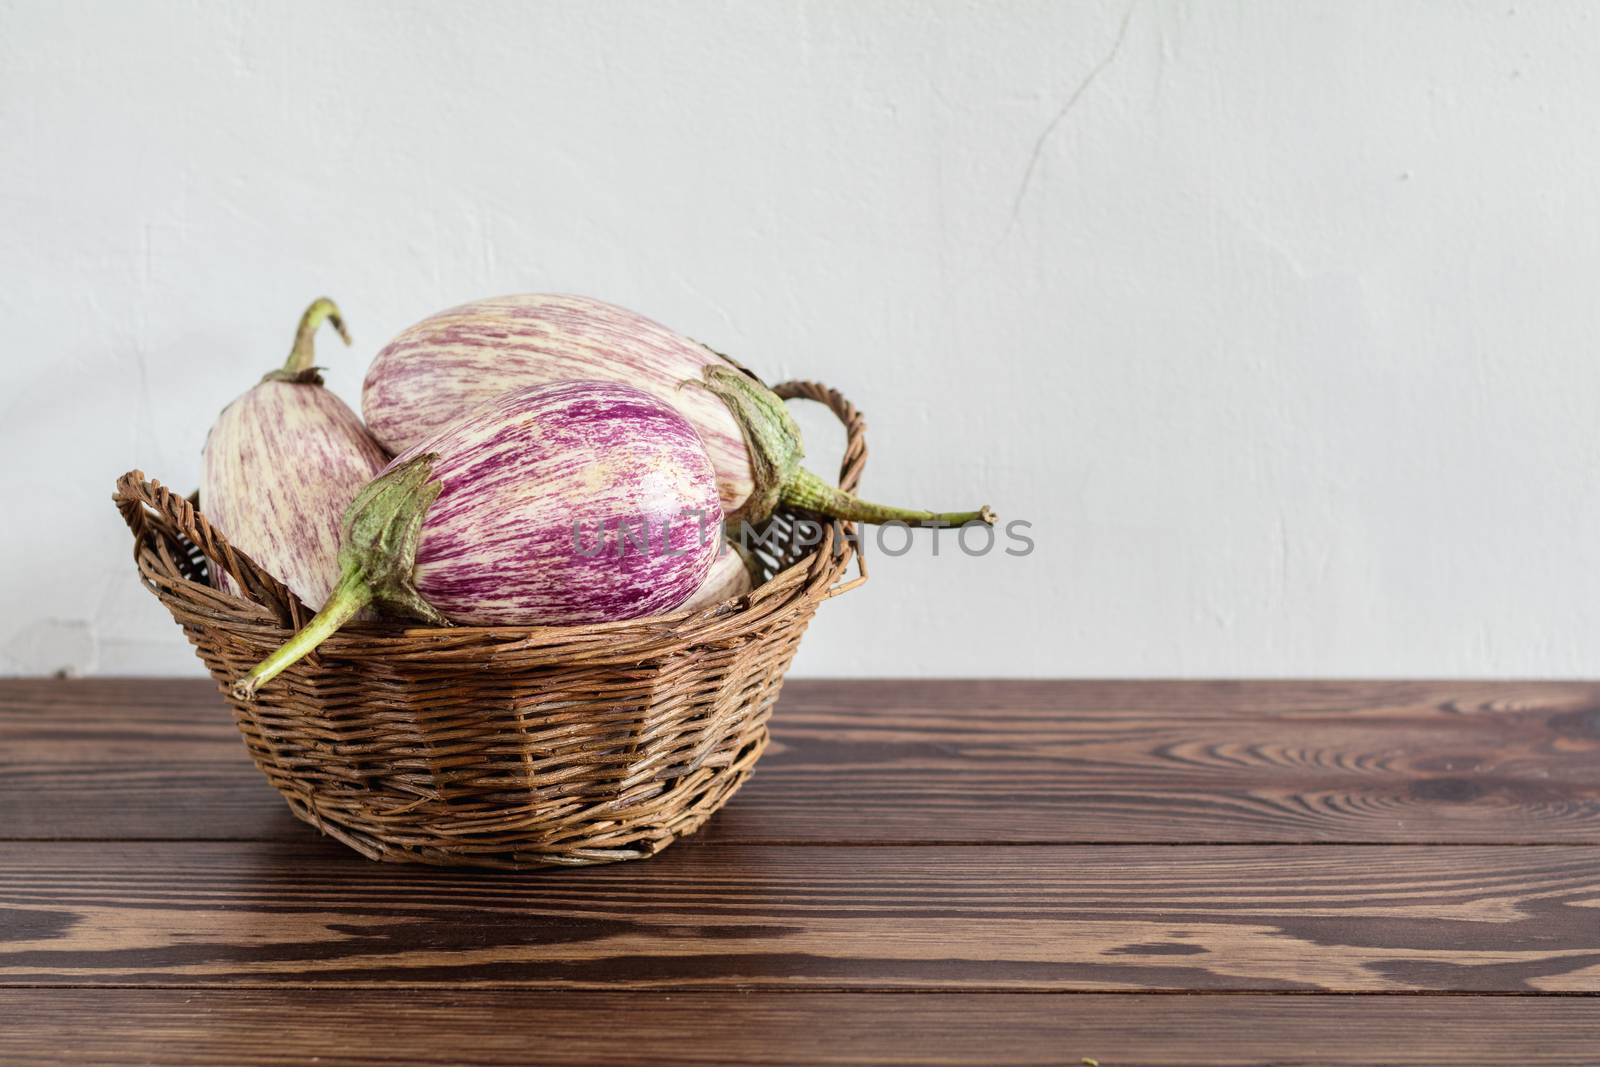 Purple graffiti eggplants in a wicker basket in a vintage wooden background in rustic style, selective focus